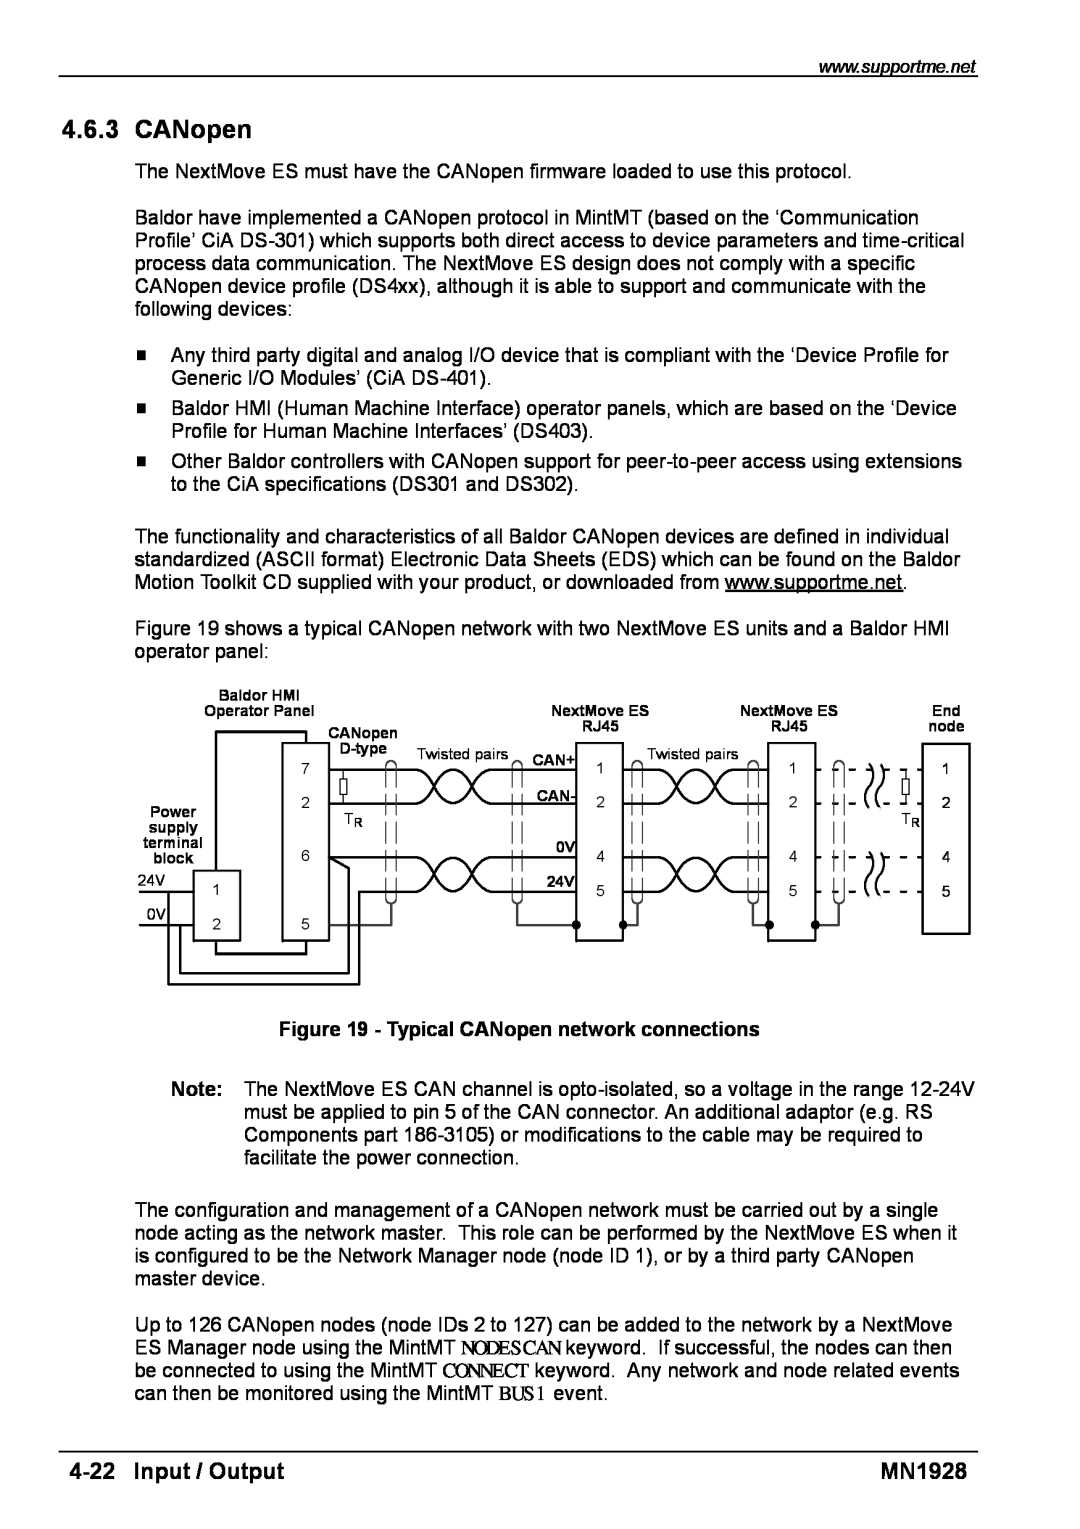 Baldor MN1928 installation manual Input / Output, Typical CANopen network connections 